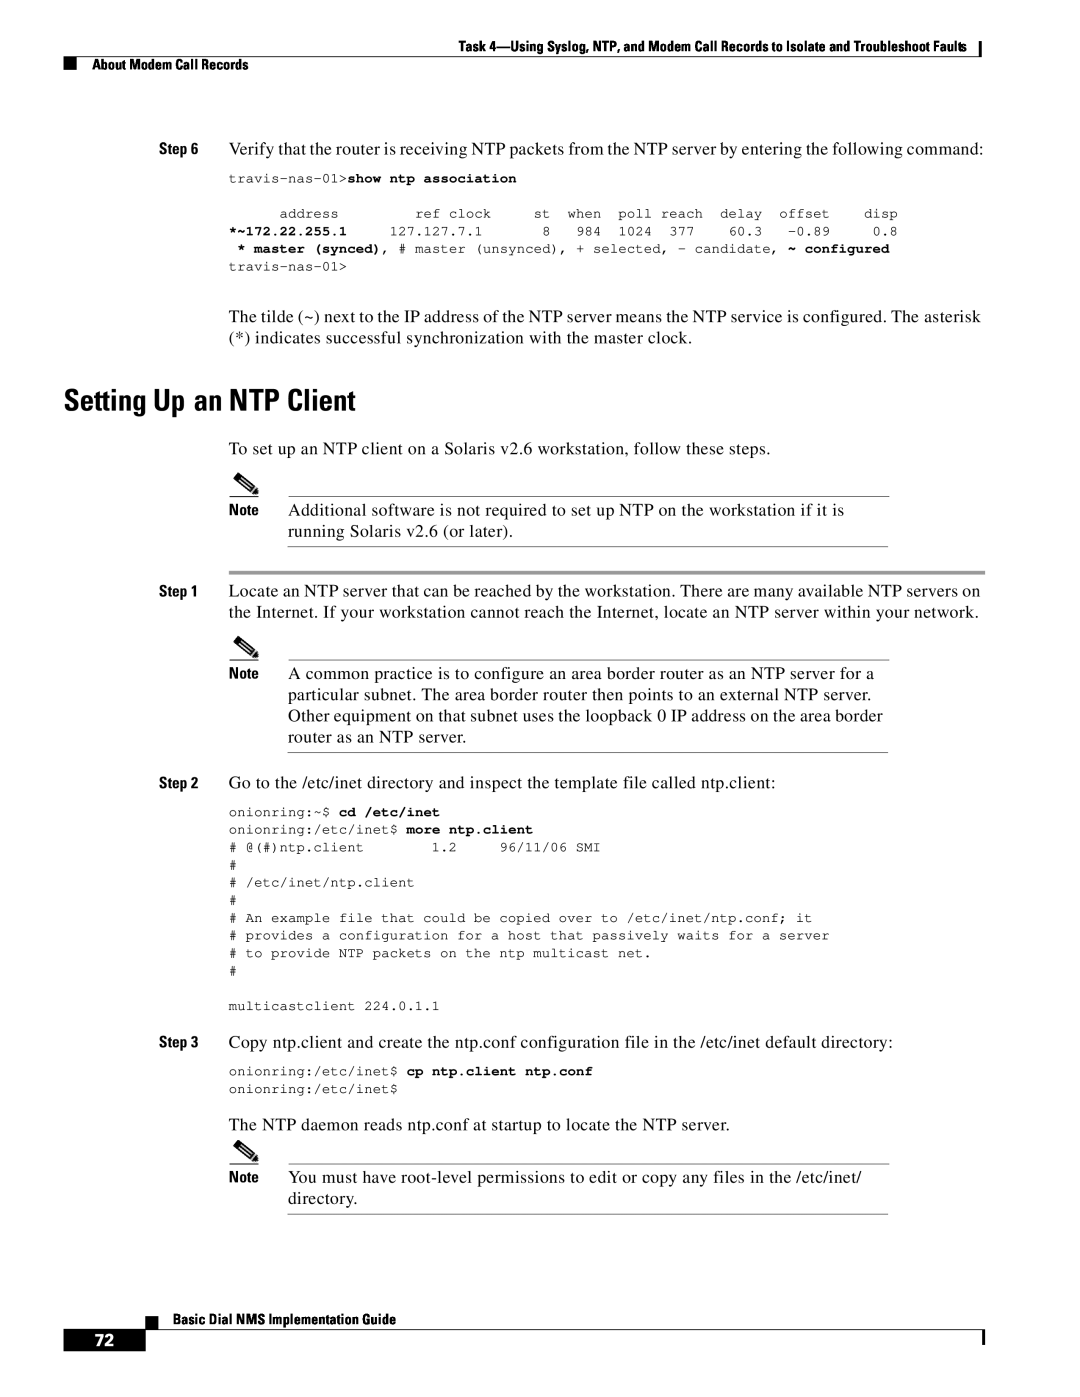 Cisco Systems Dial NMS manual Setting Up an NTP Client 